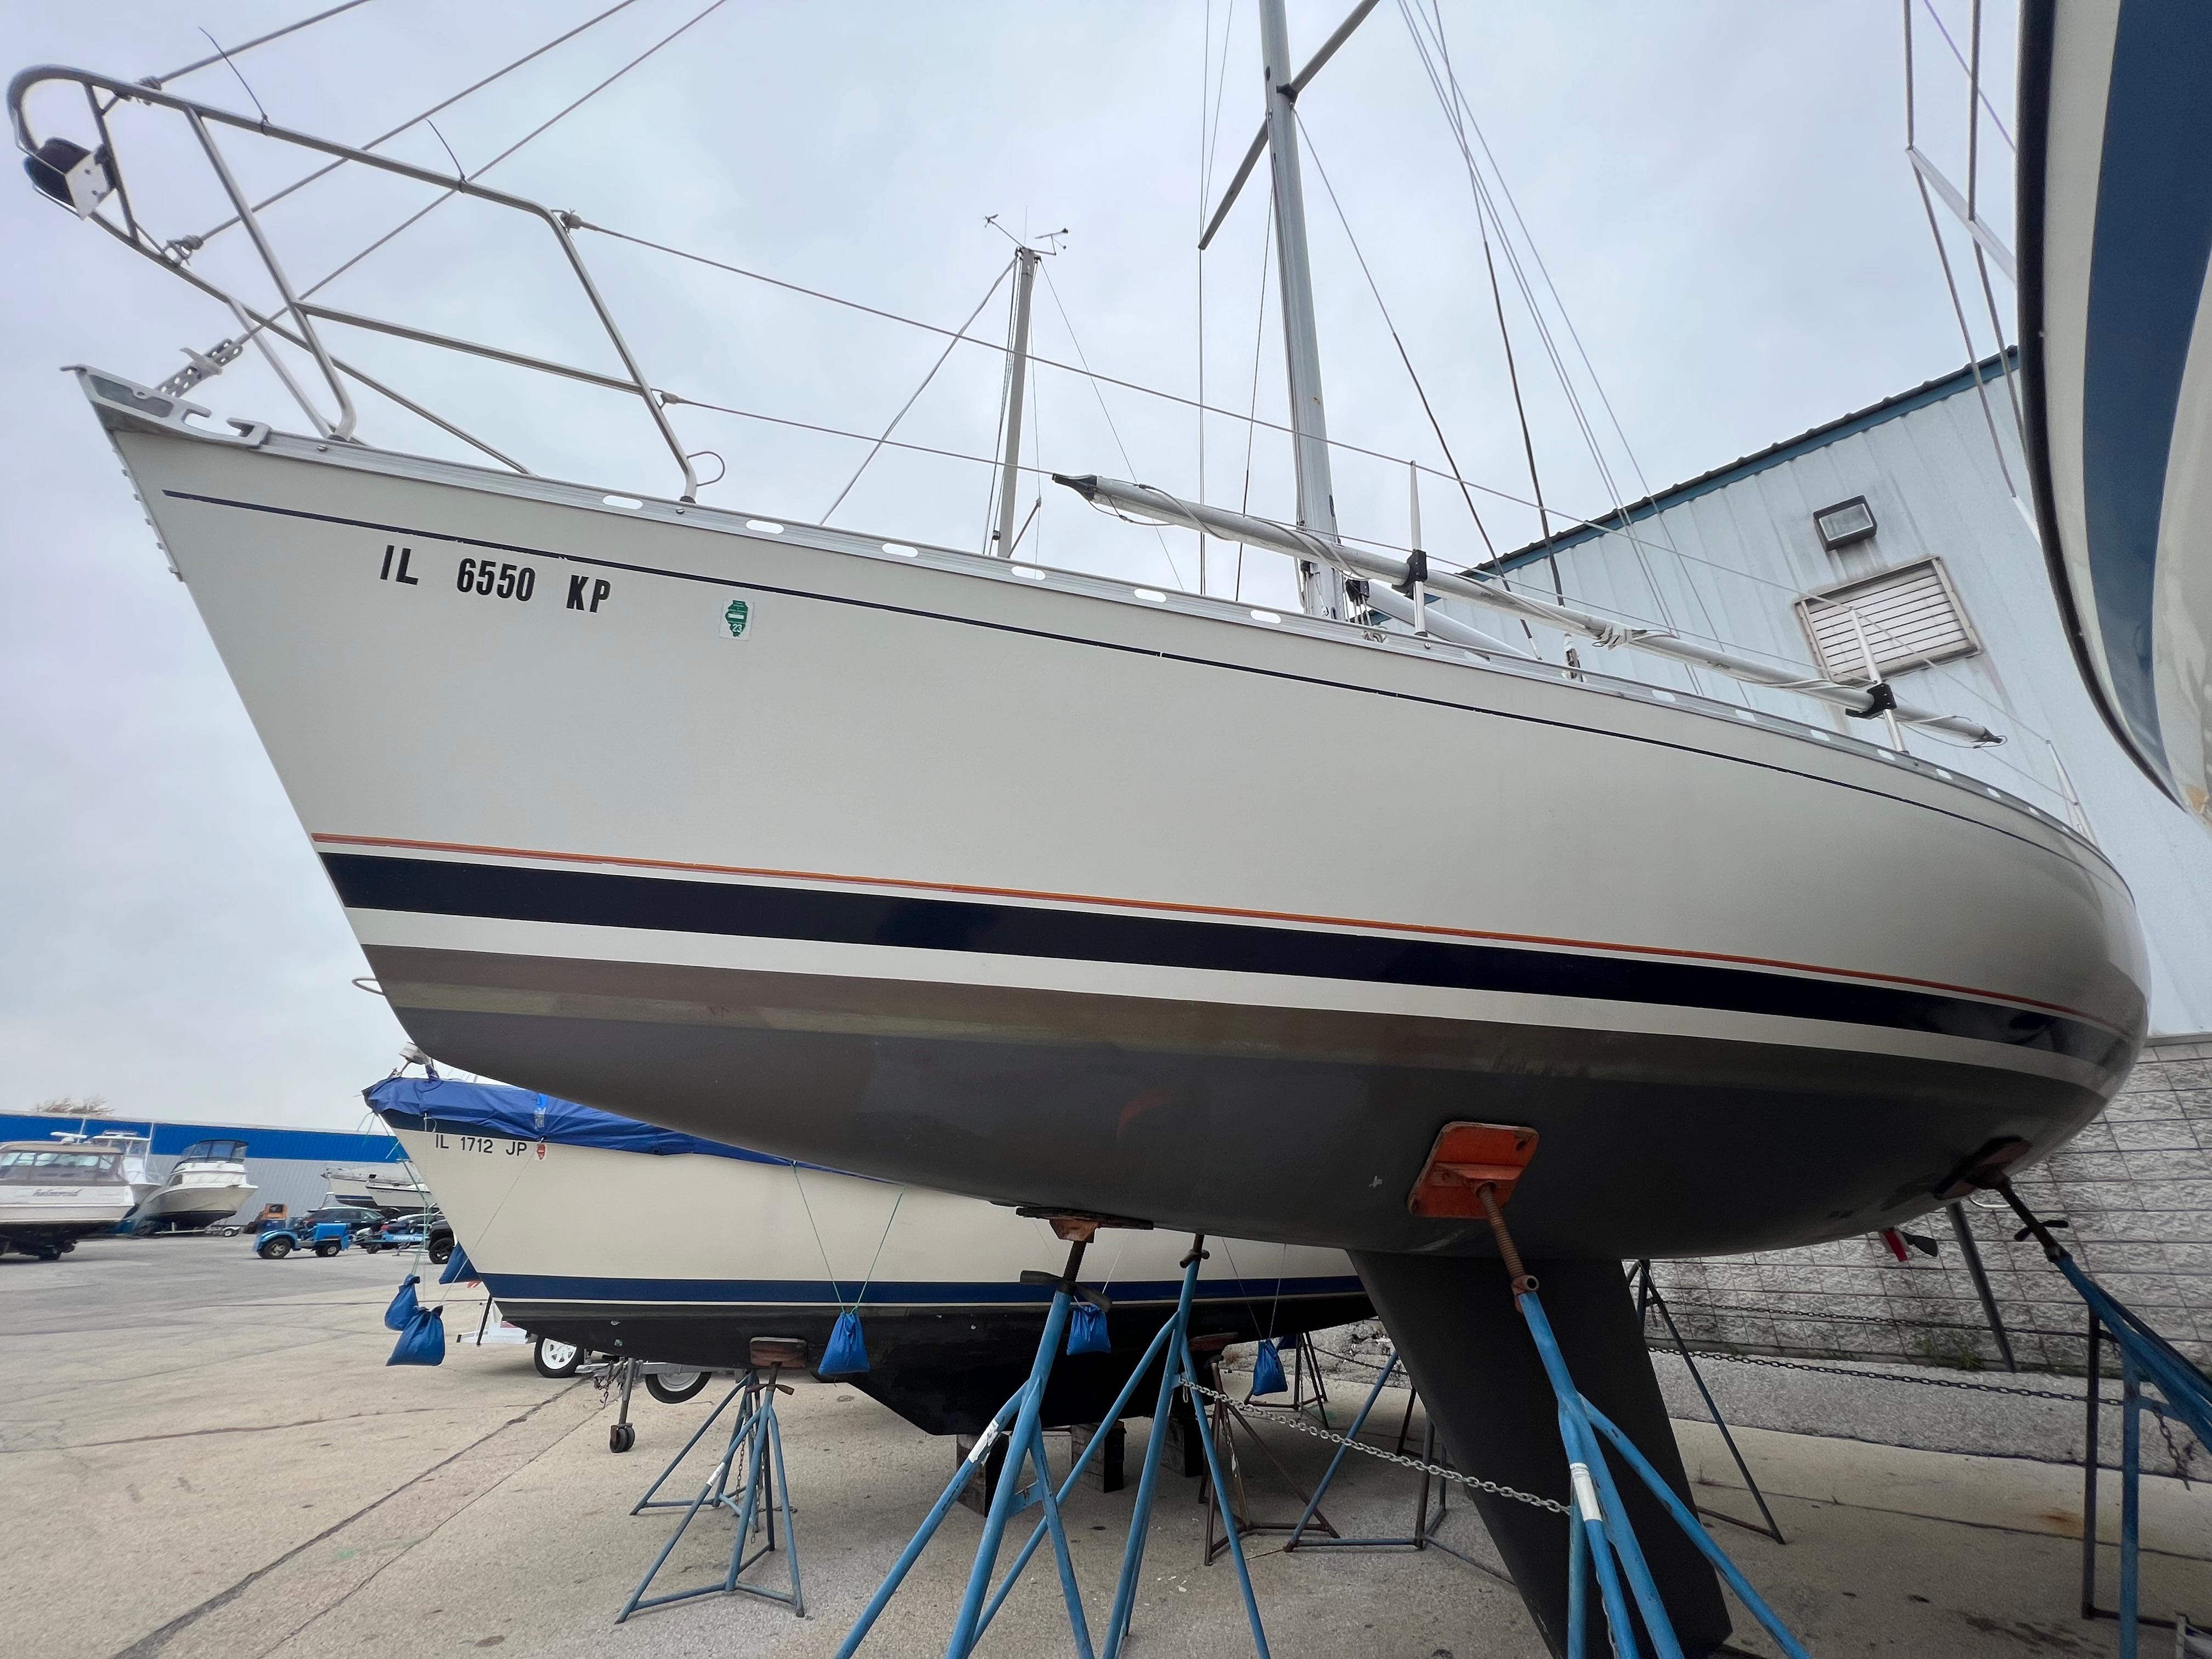 Used Boats for Sale, Ocean Yacht Sales